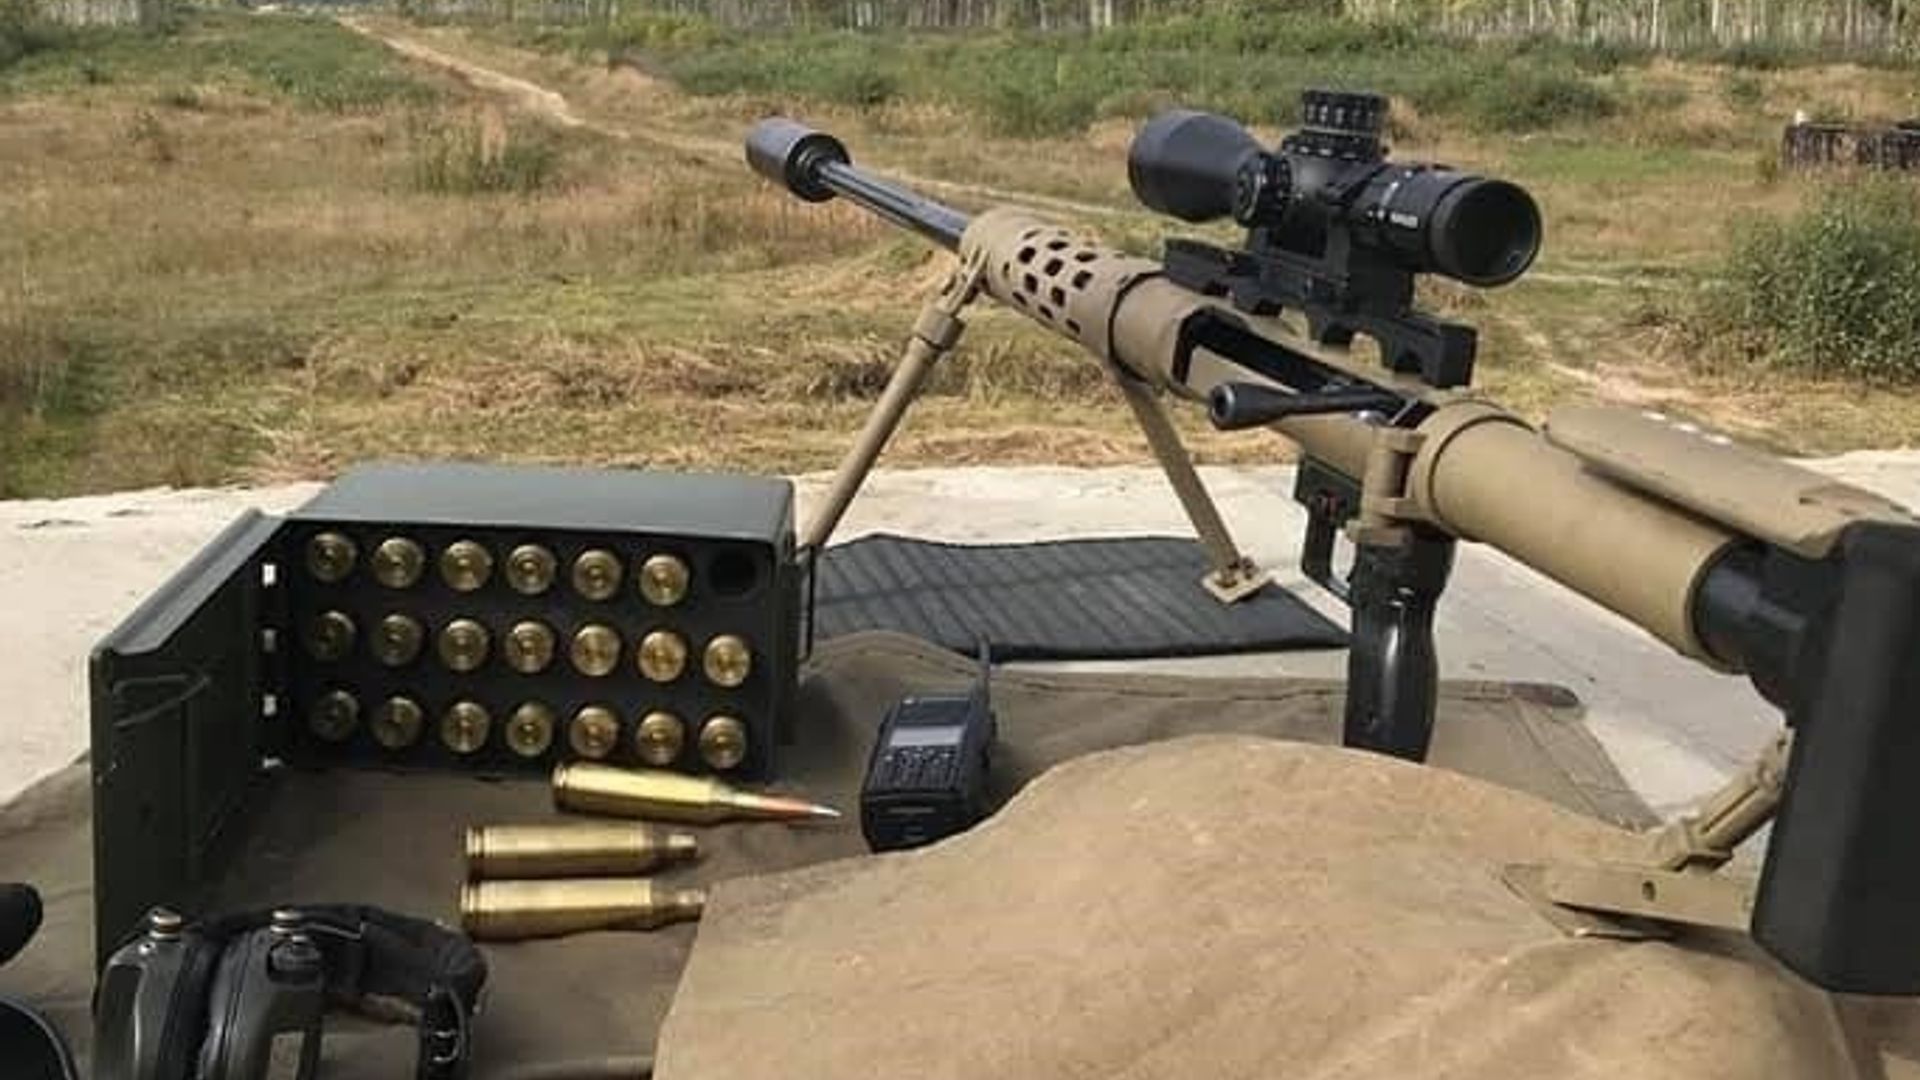 Ukraine's Security Services reported one of its snipers set a new world record for longest confirmed kill by a rifle: 3,800 meters.